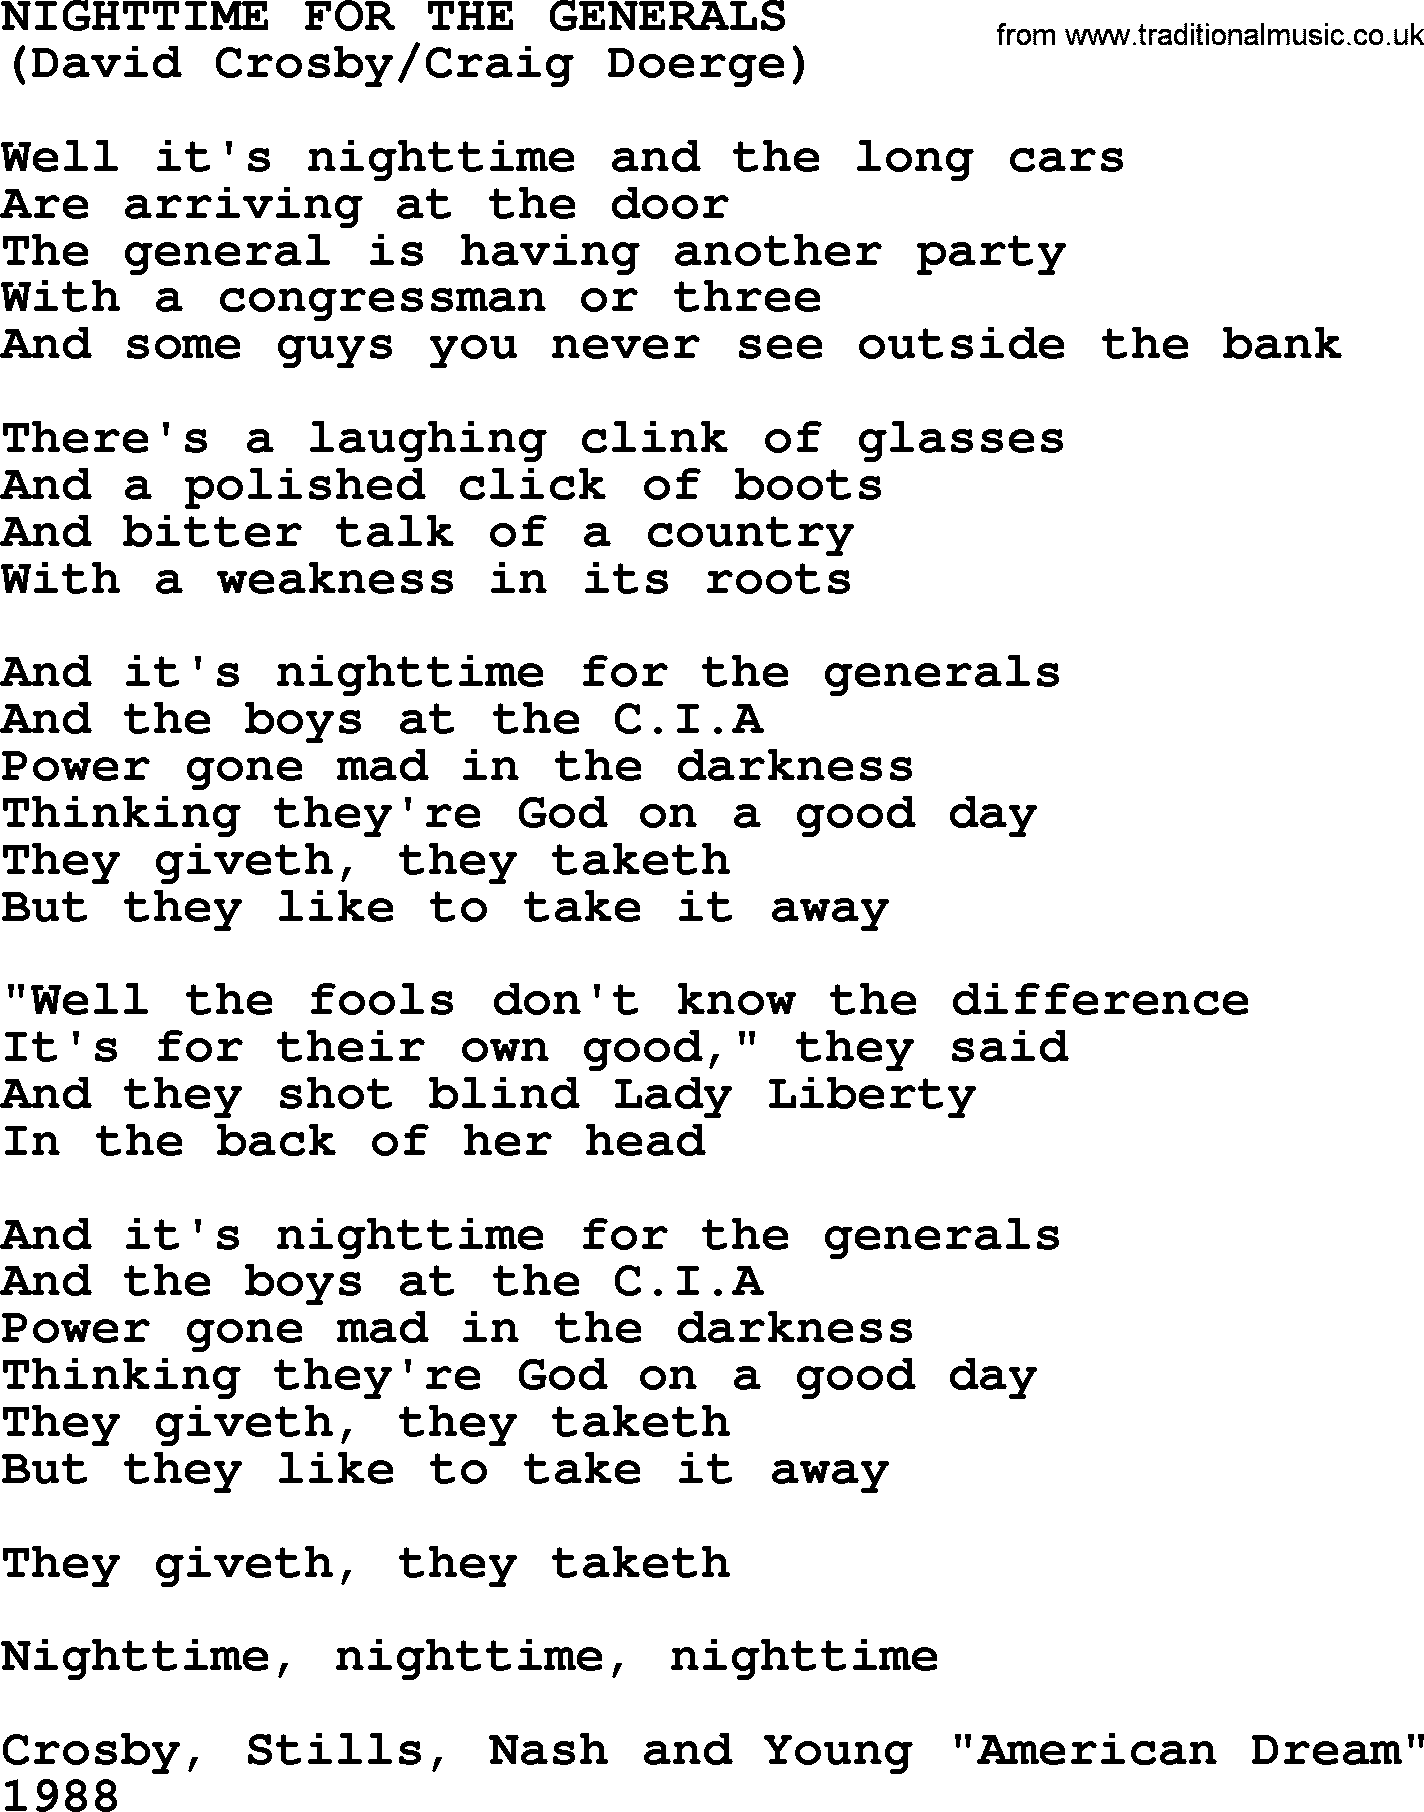 The Byrds song Nighttime For The Generals, lyrics